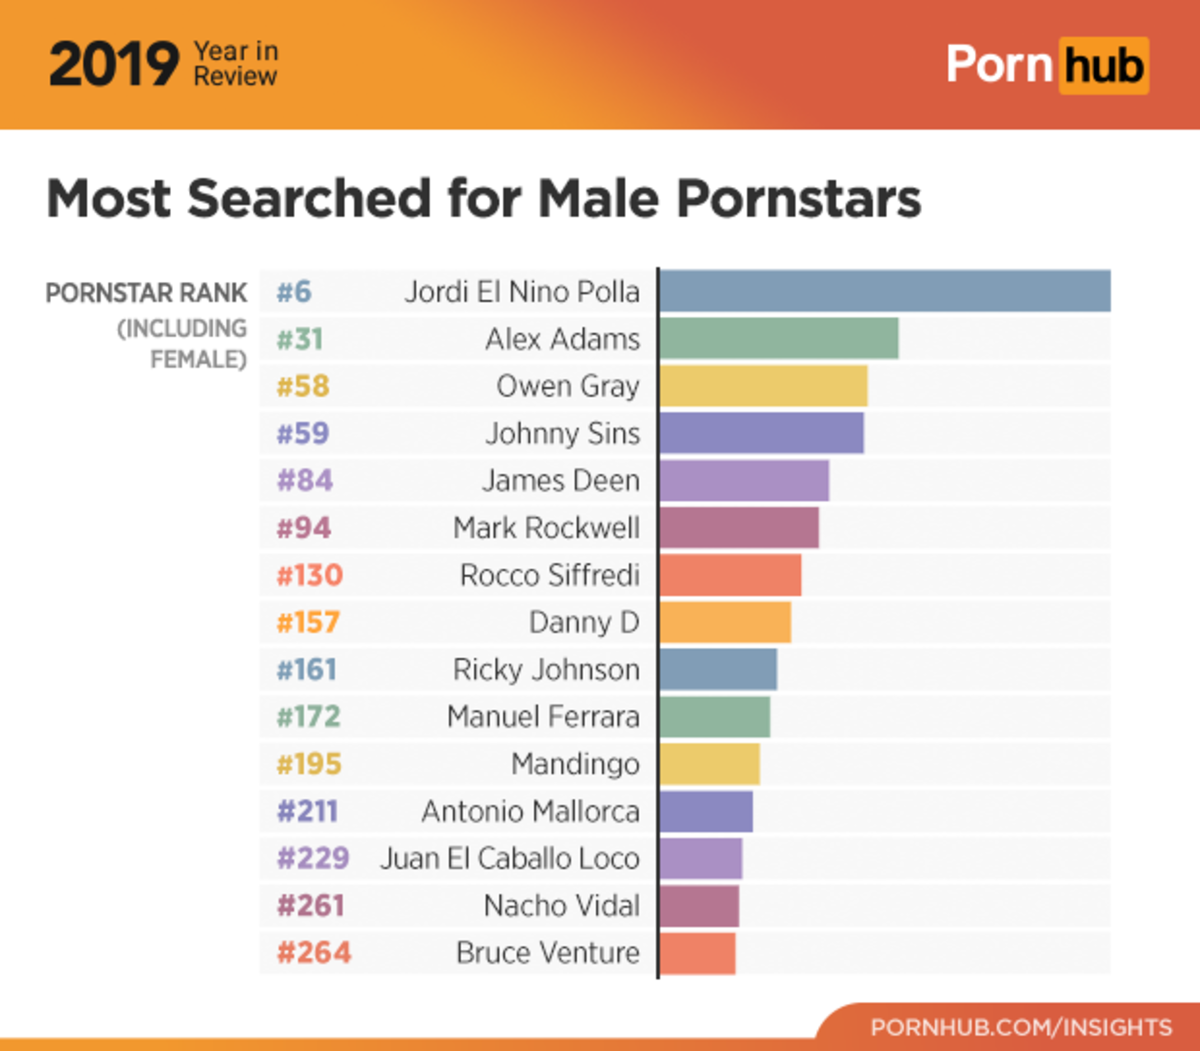 1-pornhub-insights-2019-year-review-most-searched-male-pornstars-1